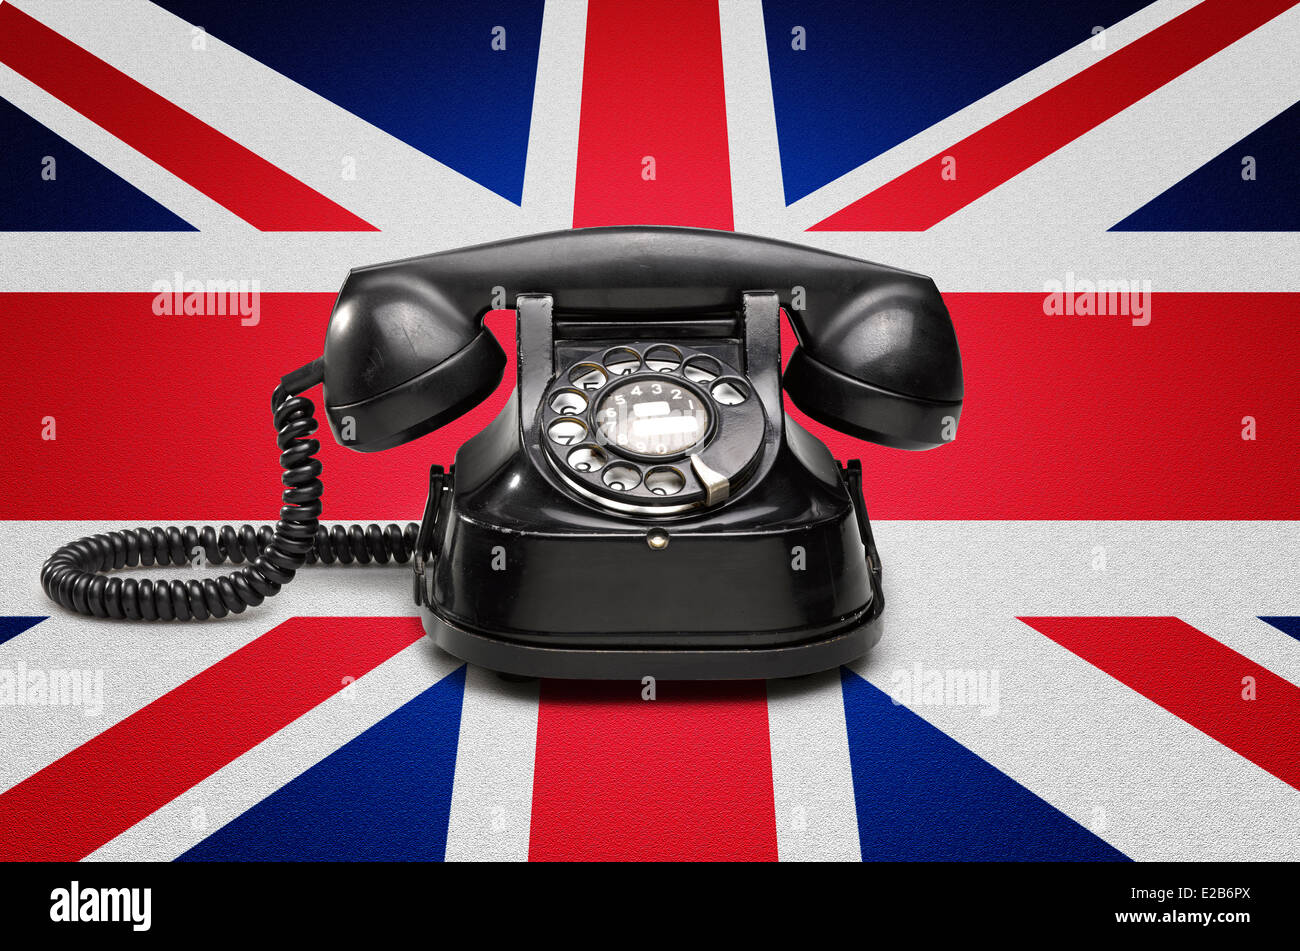 Office: old and vintage telephone on the union jack flag Stock Photo